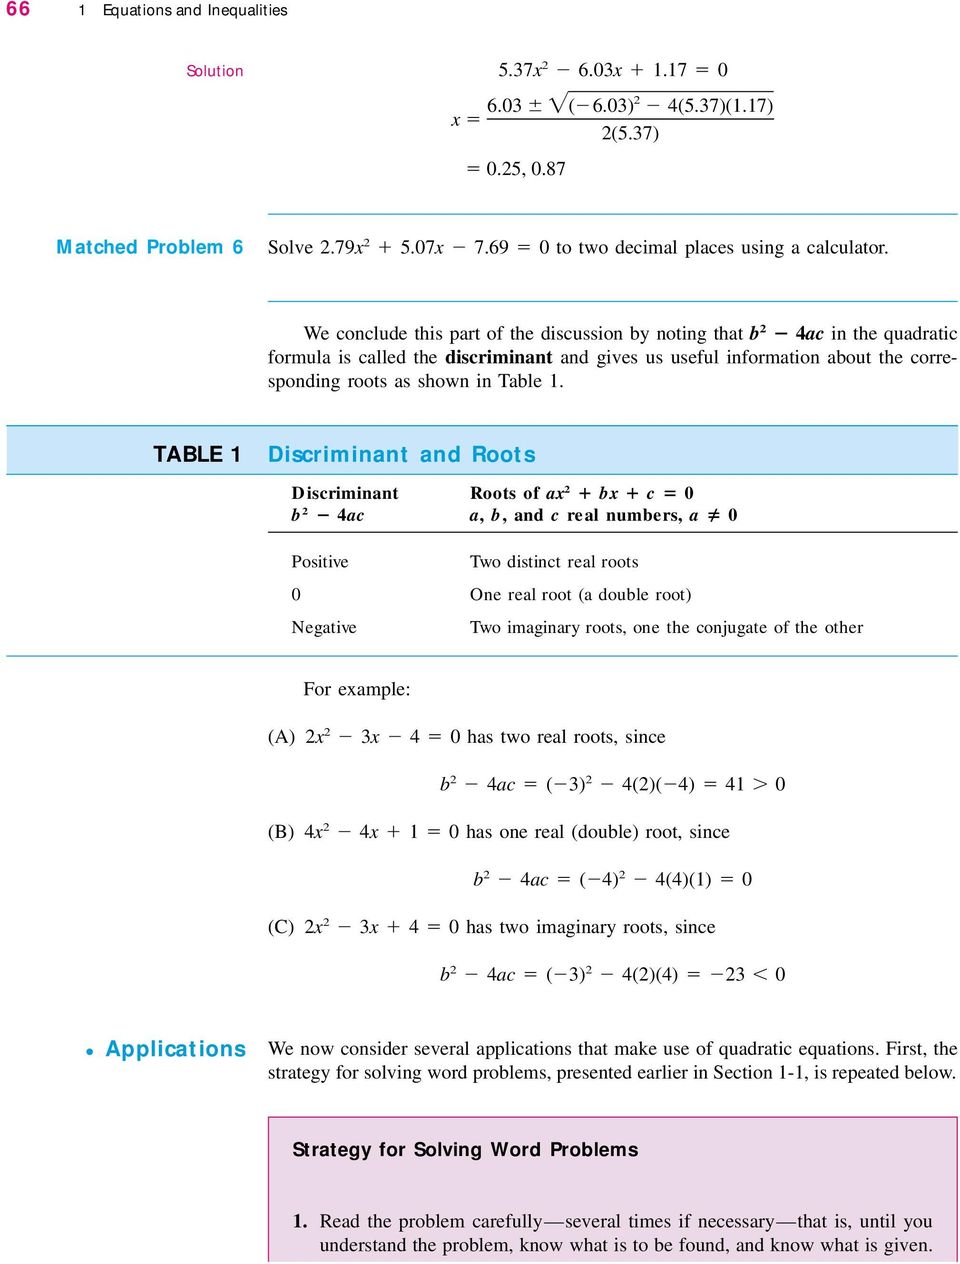 TABLE Discriminant and Roots Discriminant Roots of ax bx c 0 b ac a, b, and c real numbers, a 0 Positive Two distinct real roots 0 One real root (a double root) Negative Two imaginary roots, one the